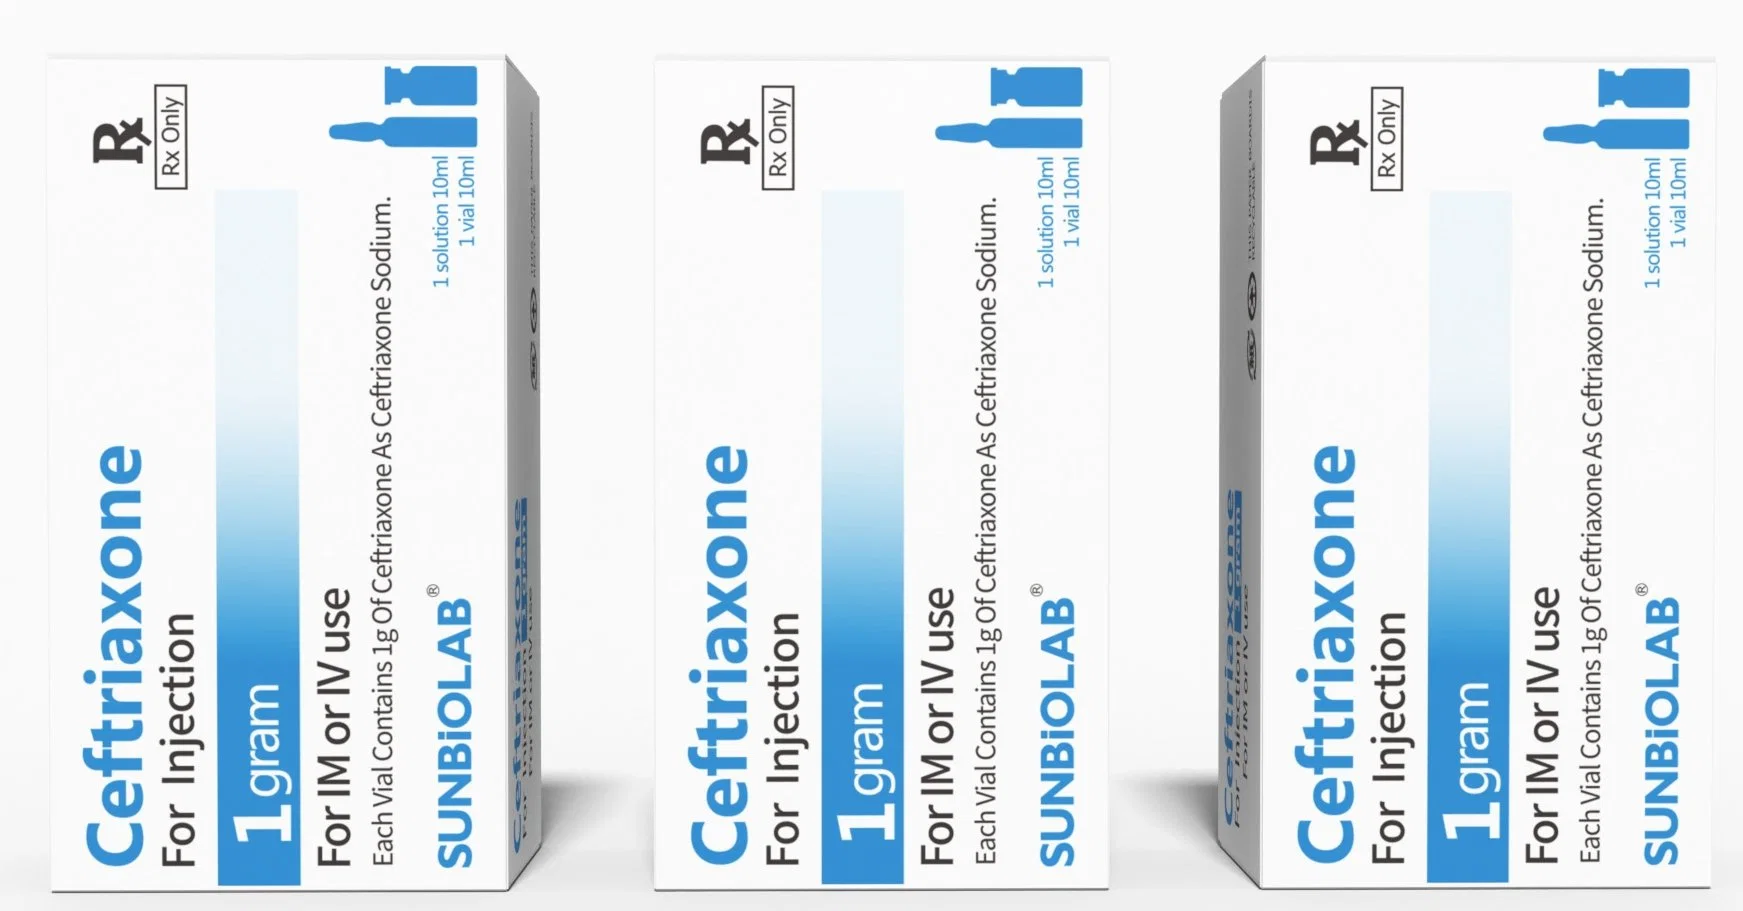 Health Care Ceftriaxione Injection 1g Powder for Injection Western Medicines Antibiotics